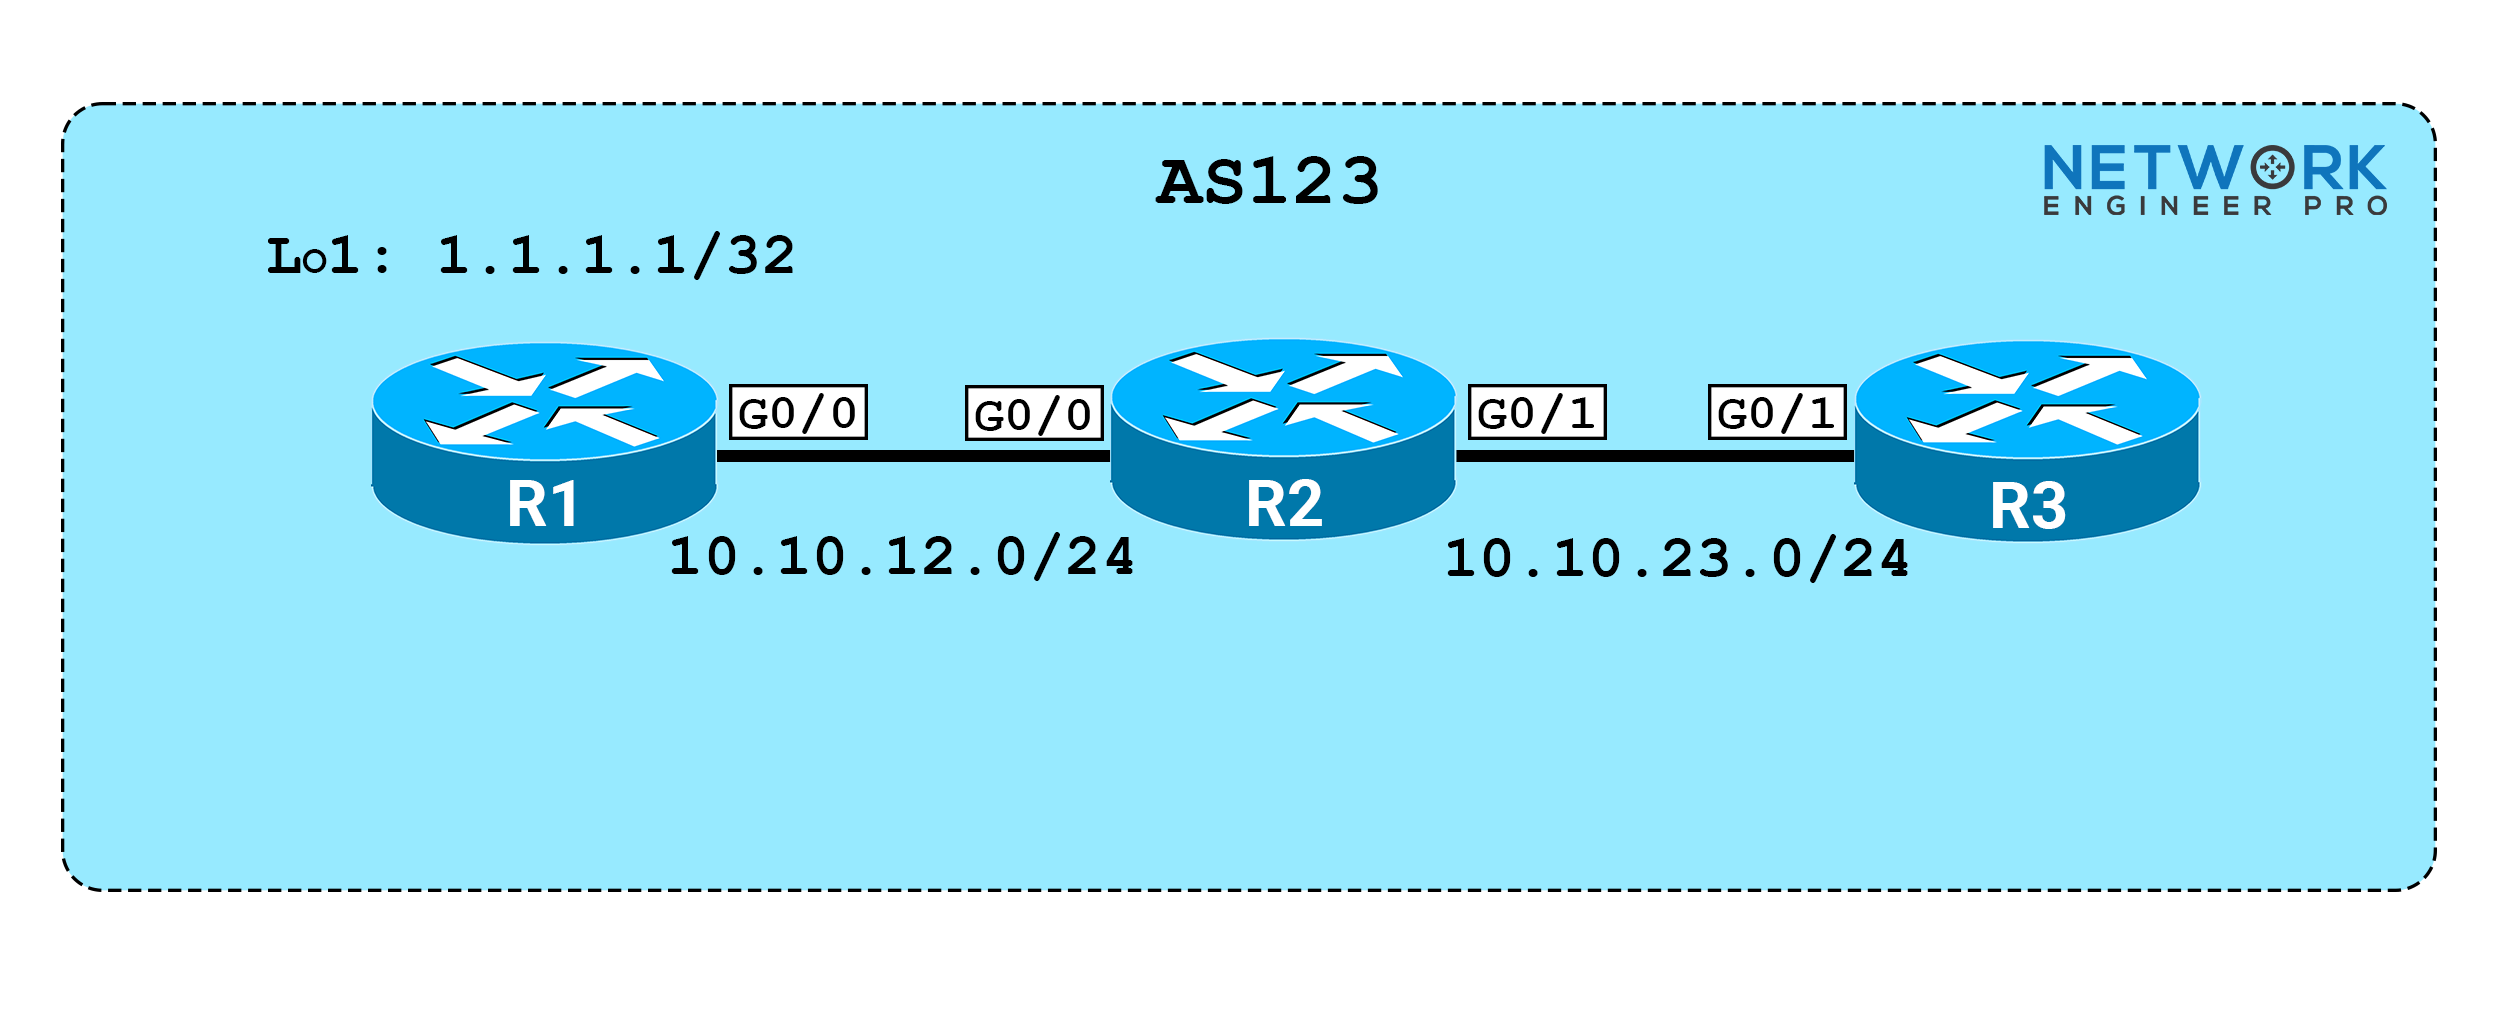 Network topology diagram illustrating for full mesh ibgp and logical peering with R1, R2, and R3 in AS123.